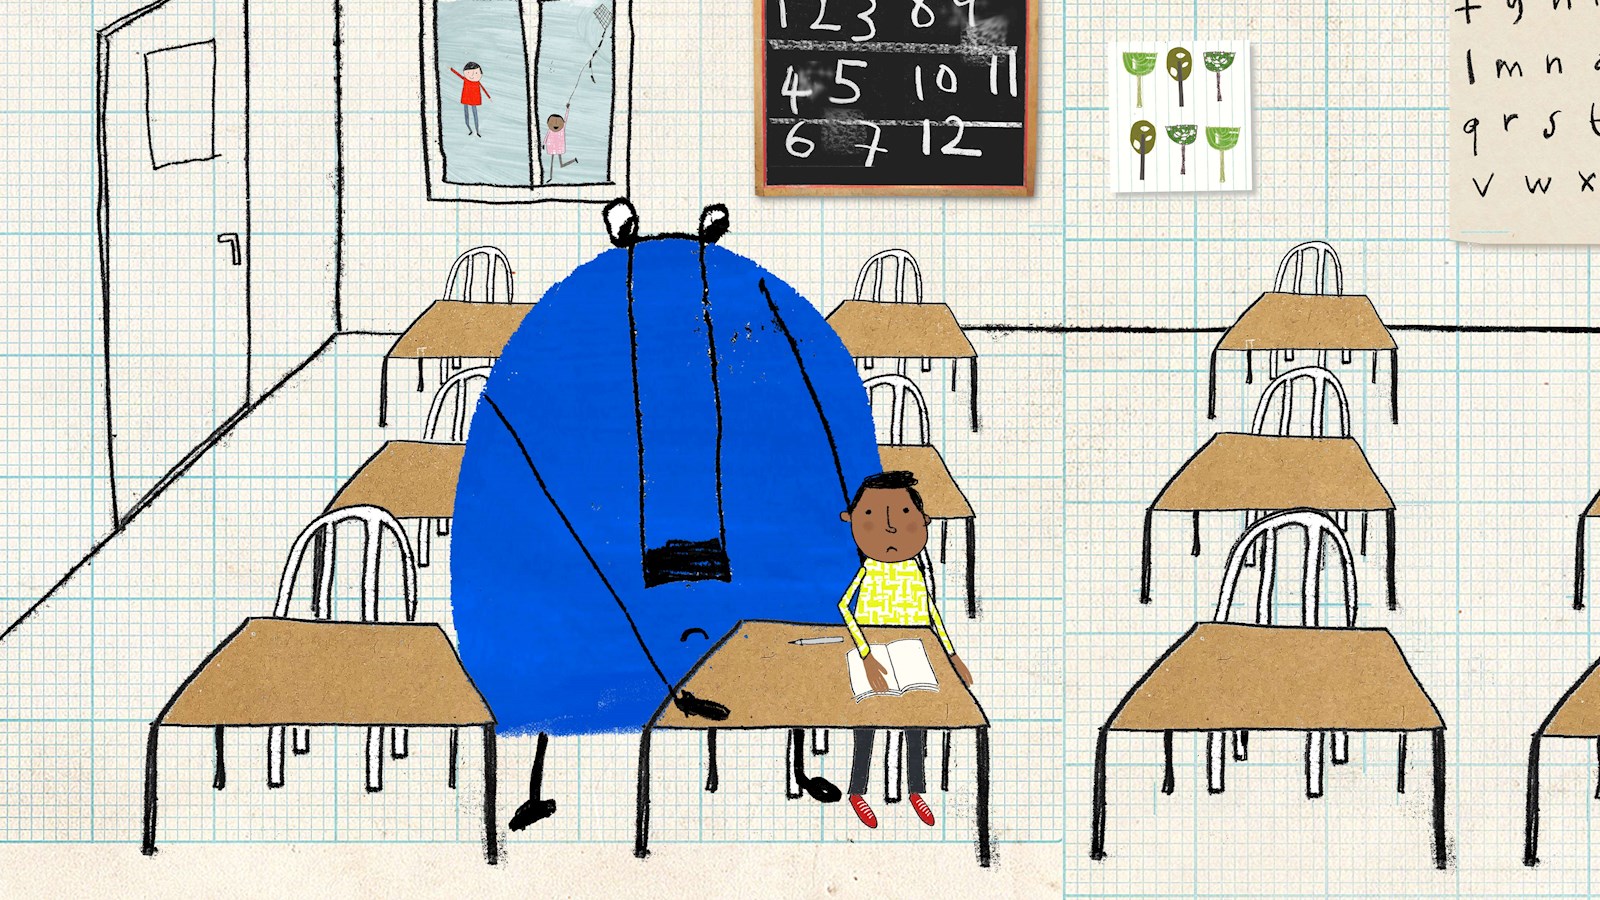 Animation of blue monster and child in a classroom